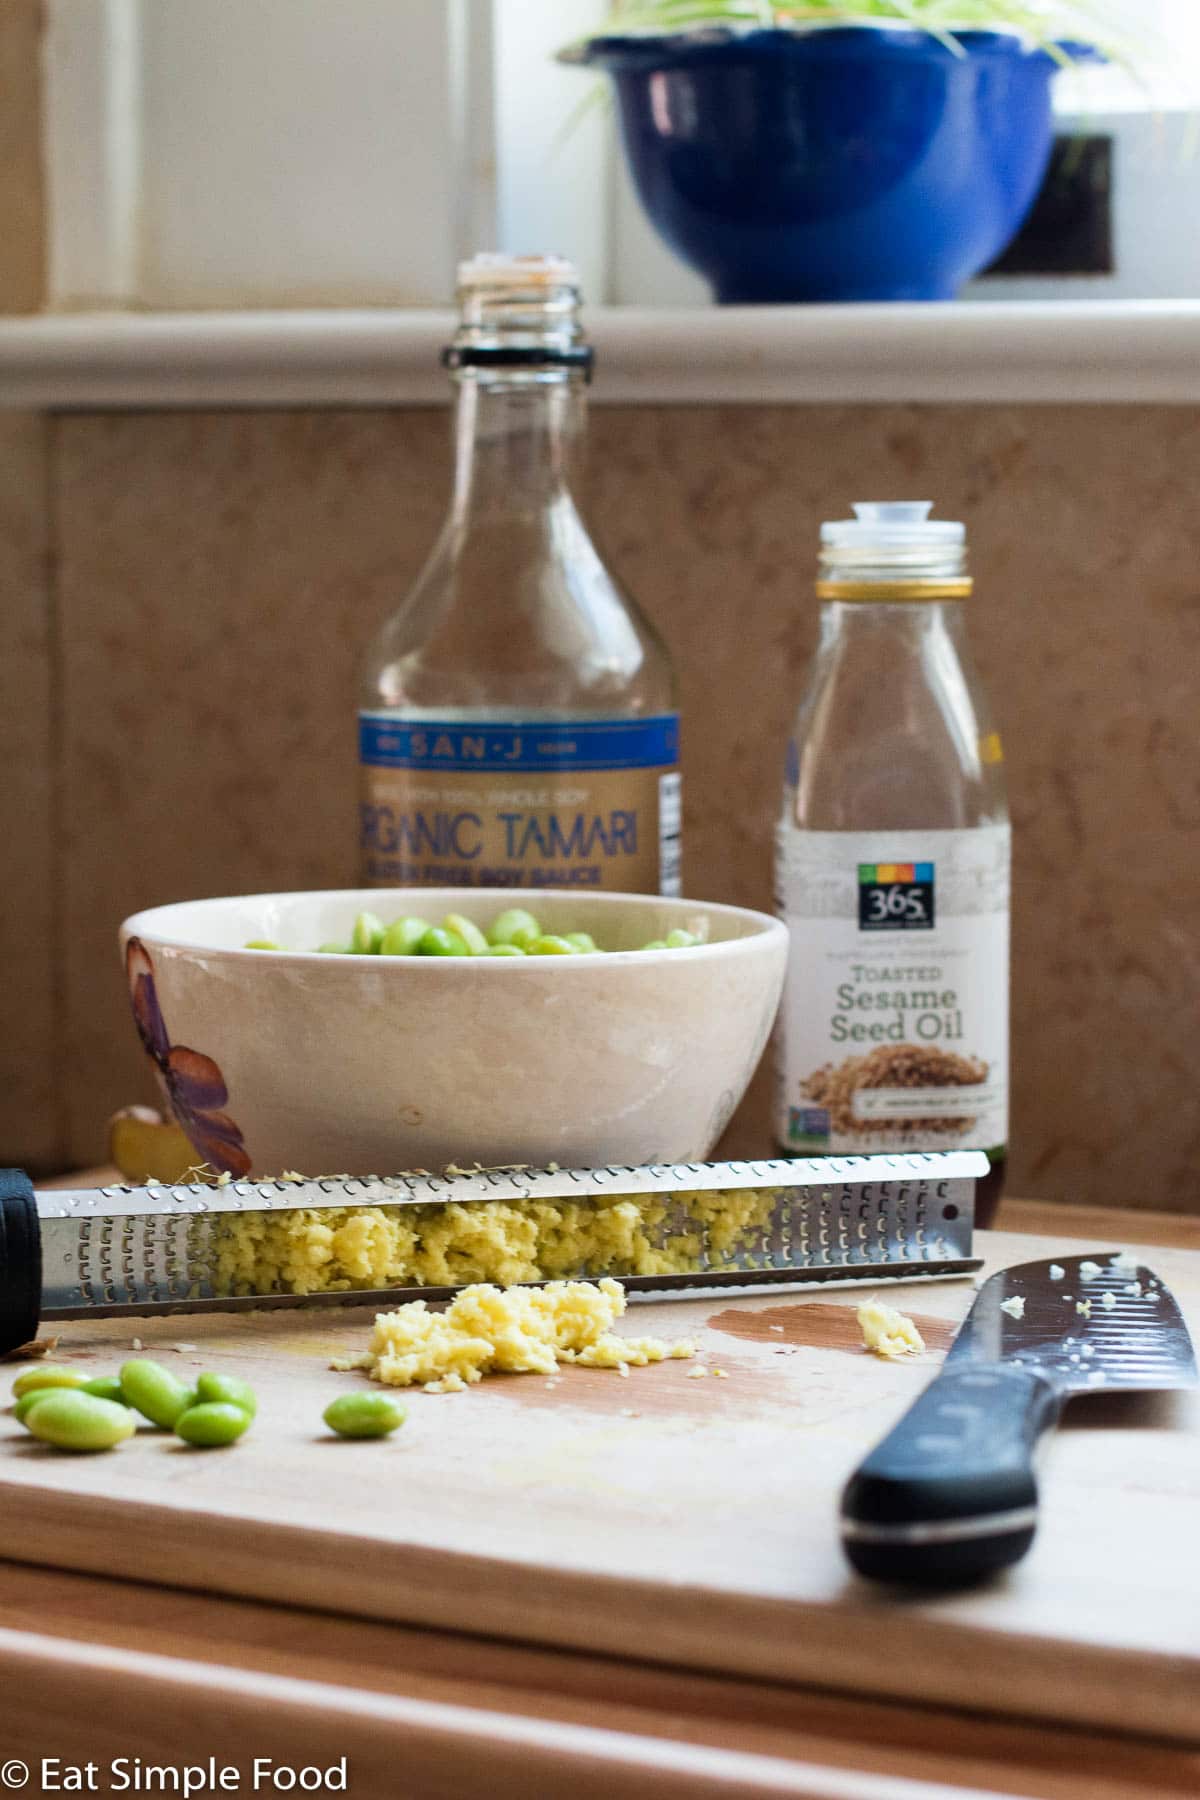 Ingredients on a wood cutting board: sesame oil bottle, soy sauce bottle, bowl of shelled edamame, minced ginger, chef's knife.